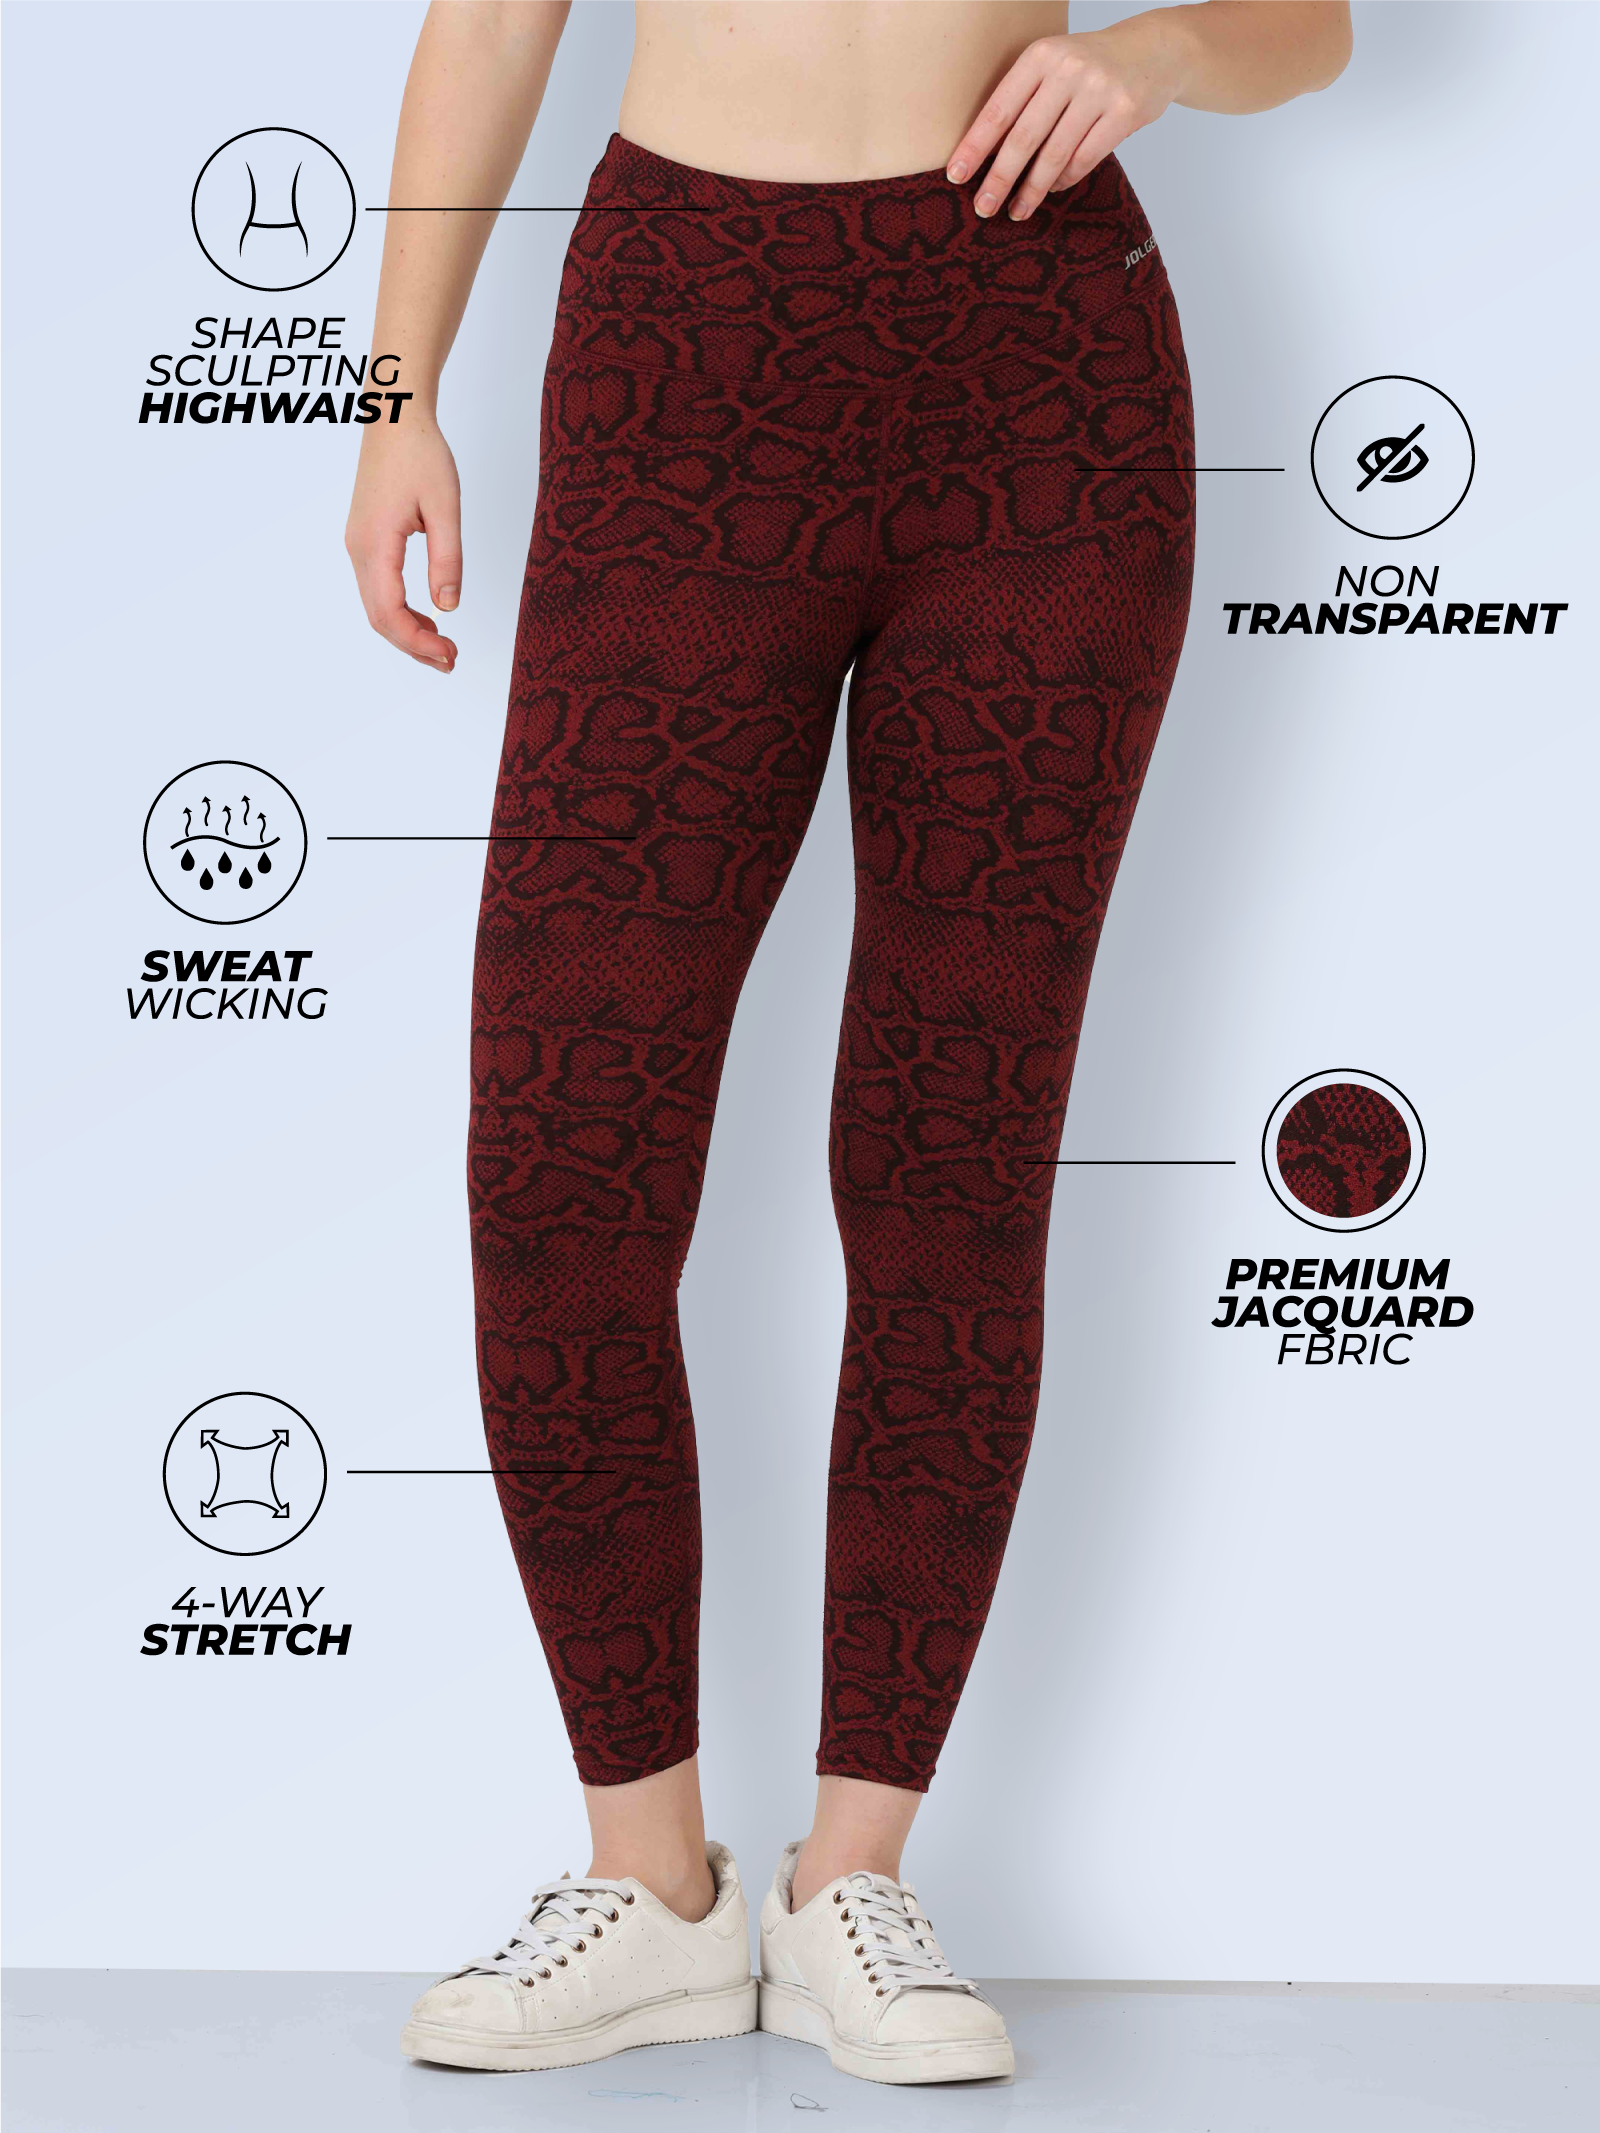 Gym & Sports Leggings For Women - maroon color